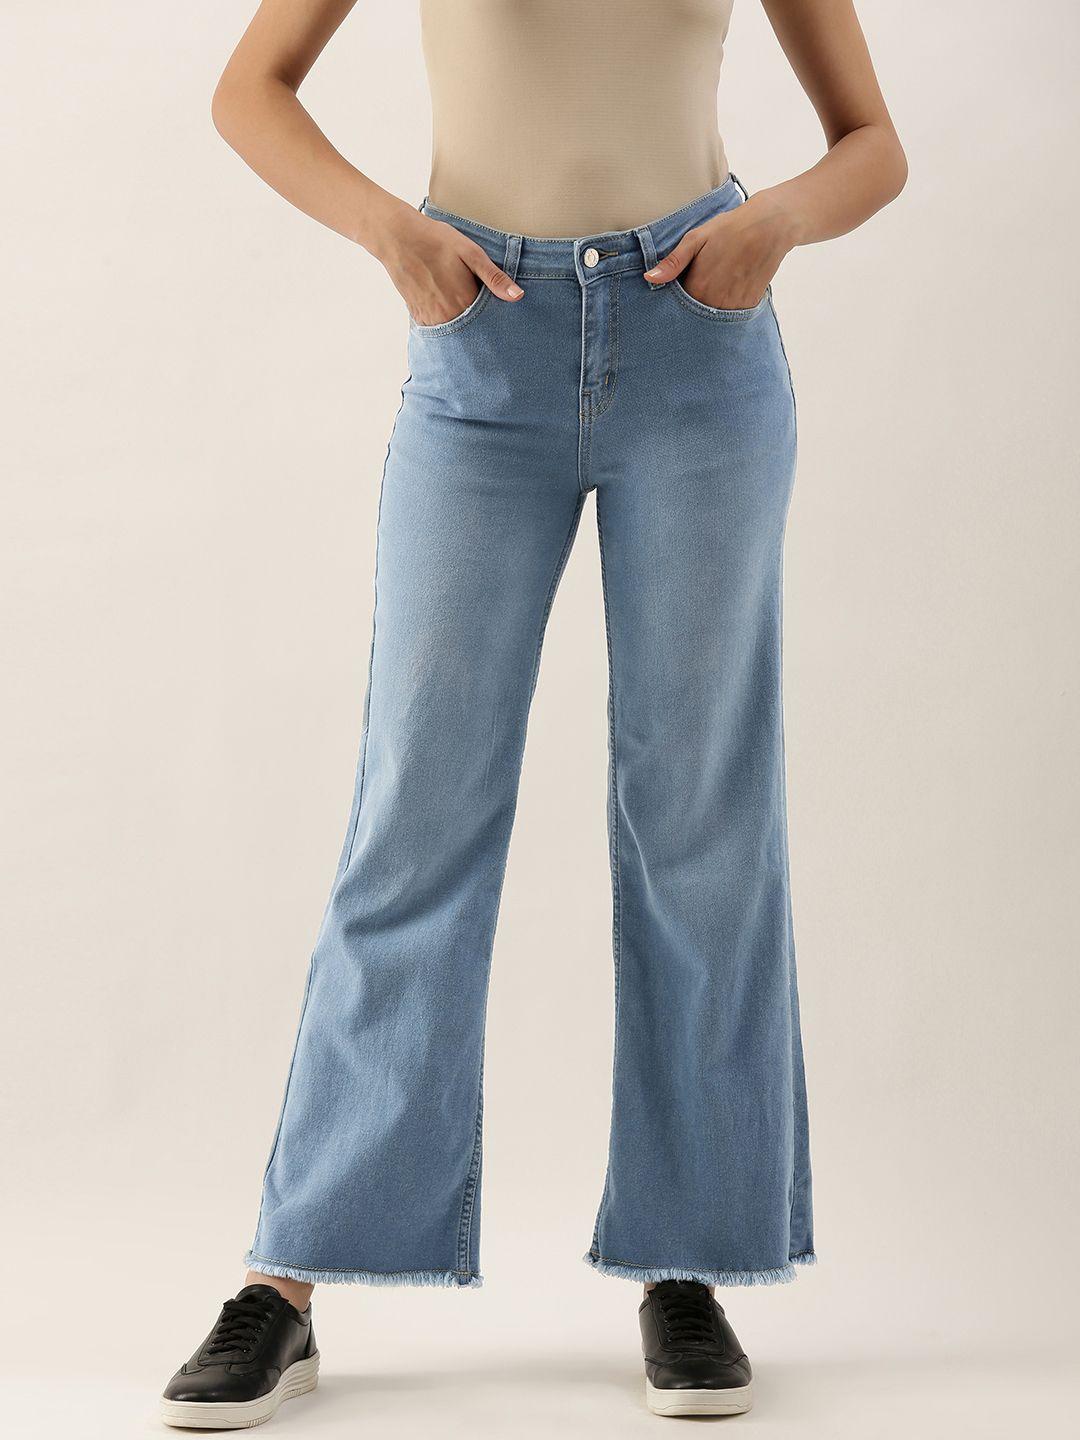 and women blue flared light fade fit and flared stretchable jeans